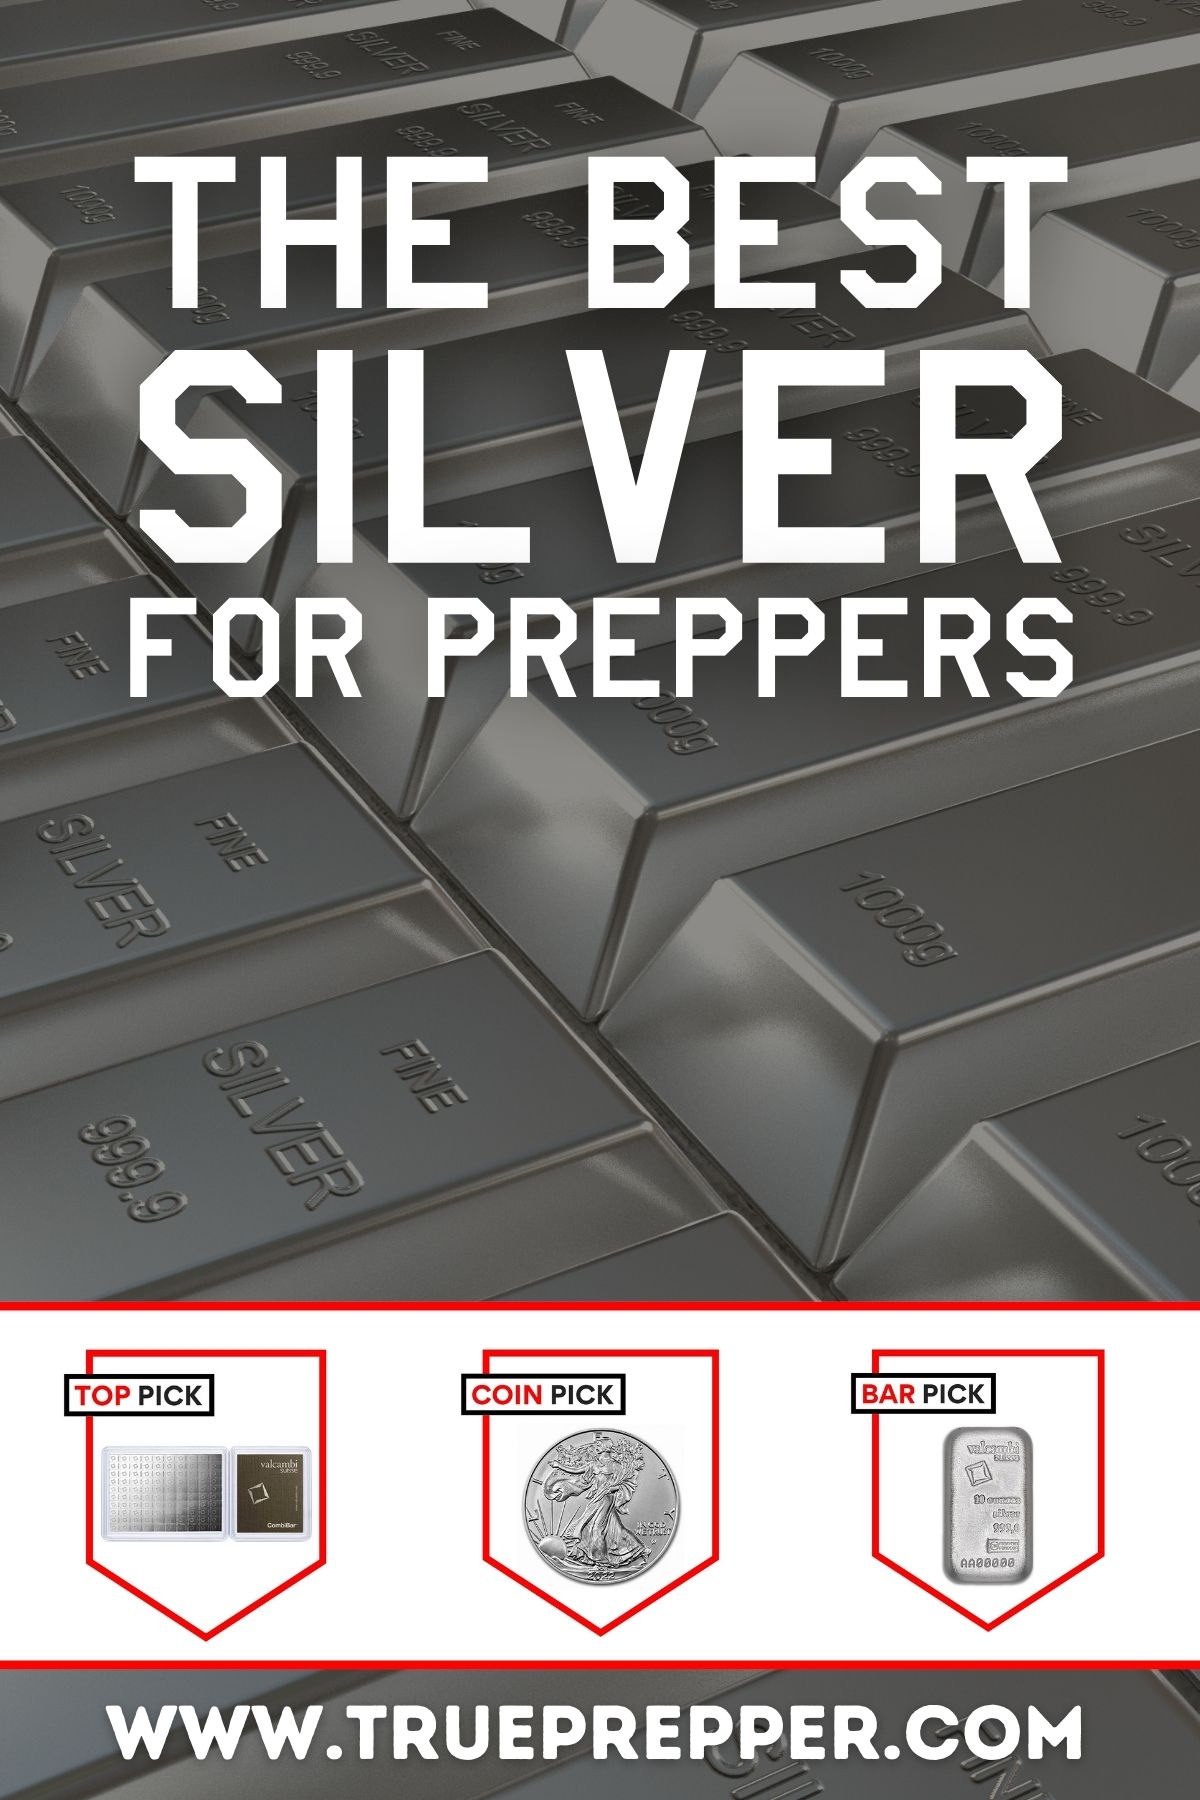 The Best Silver for Preppers